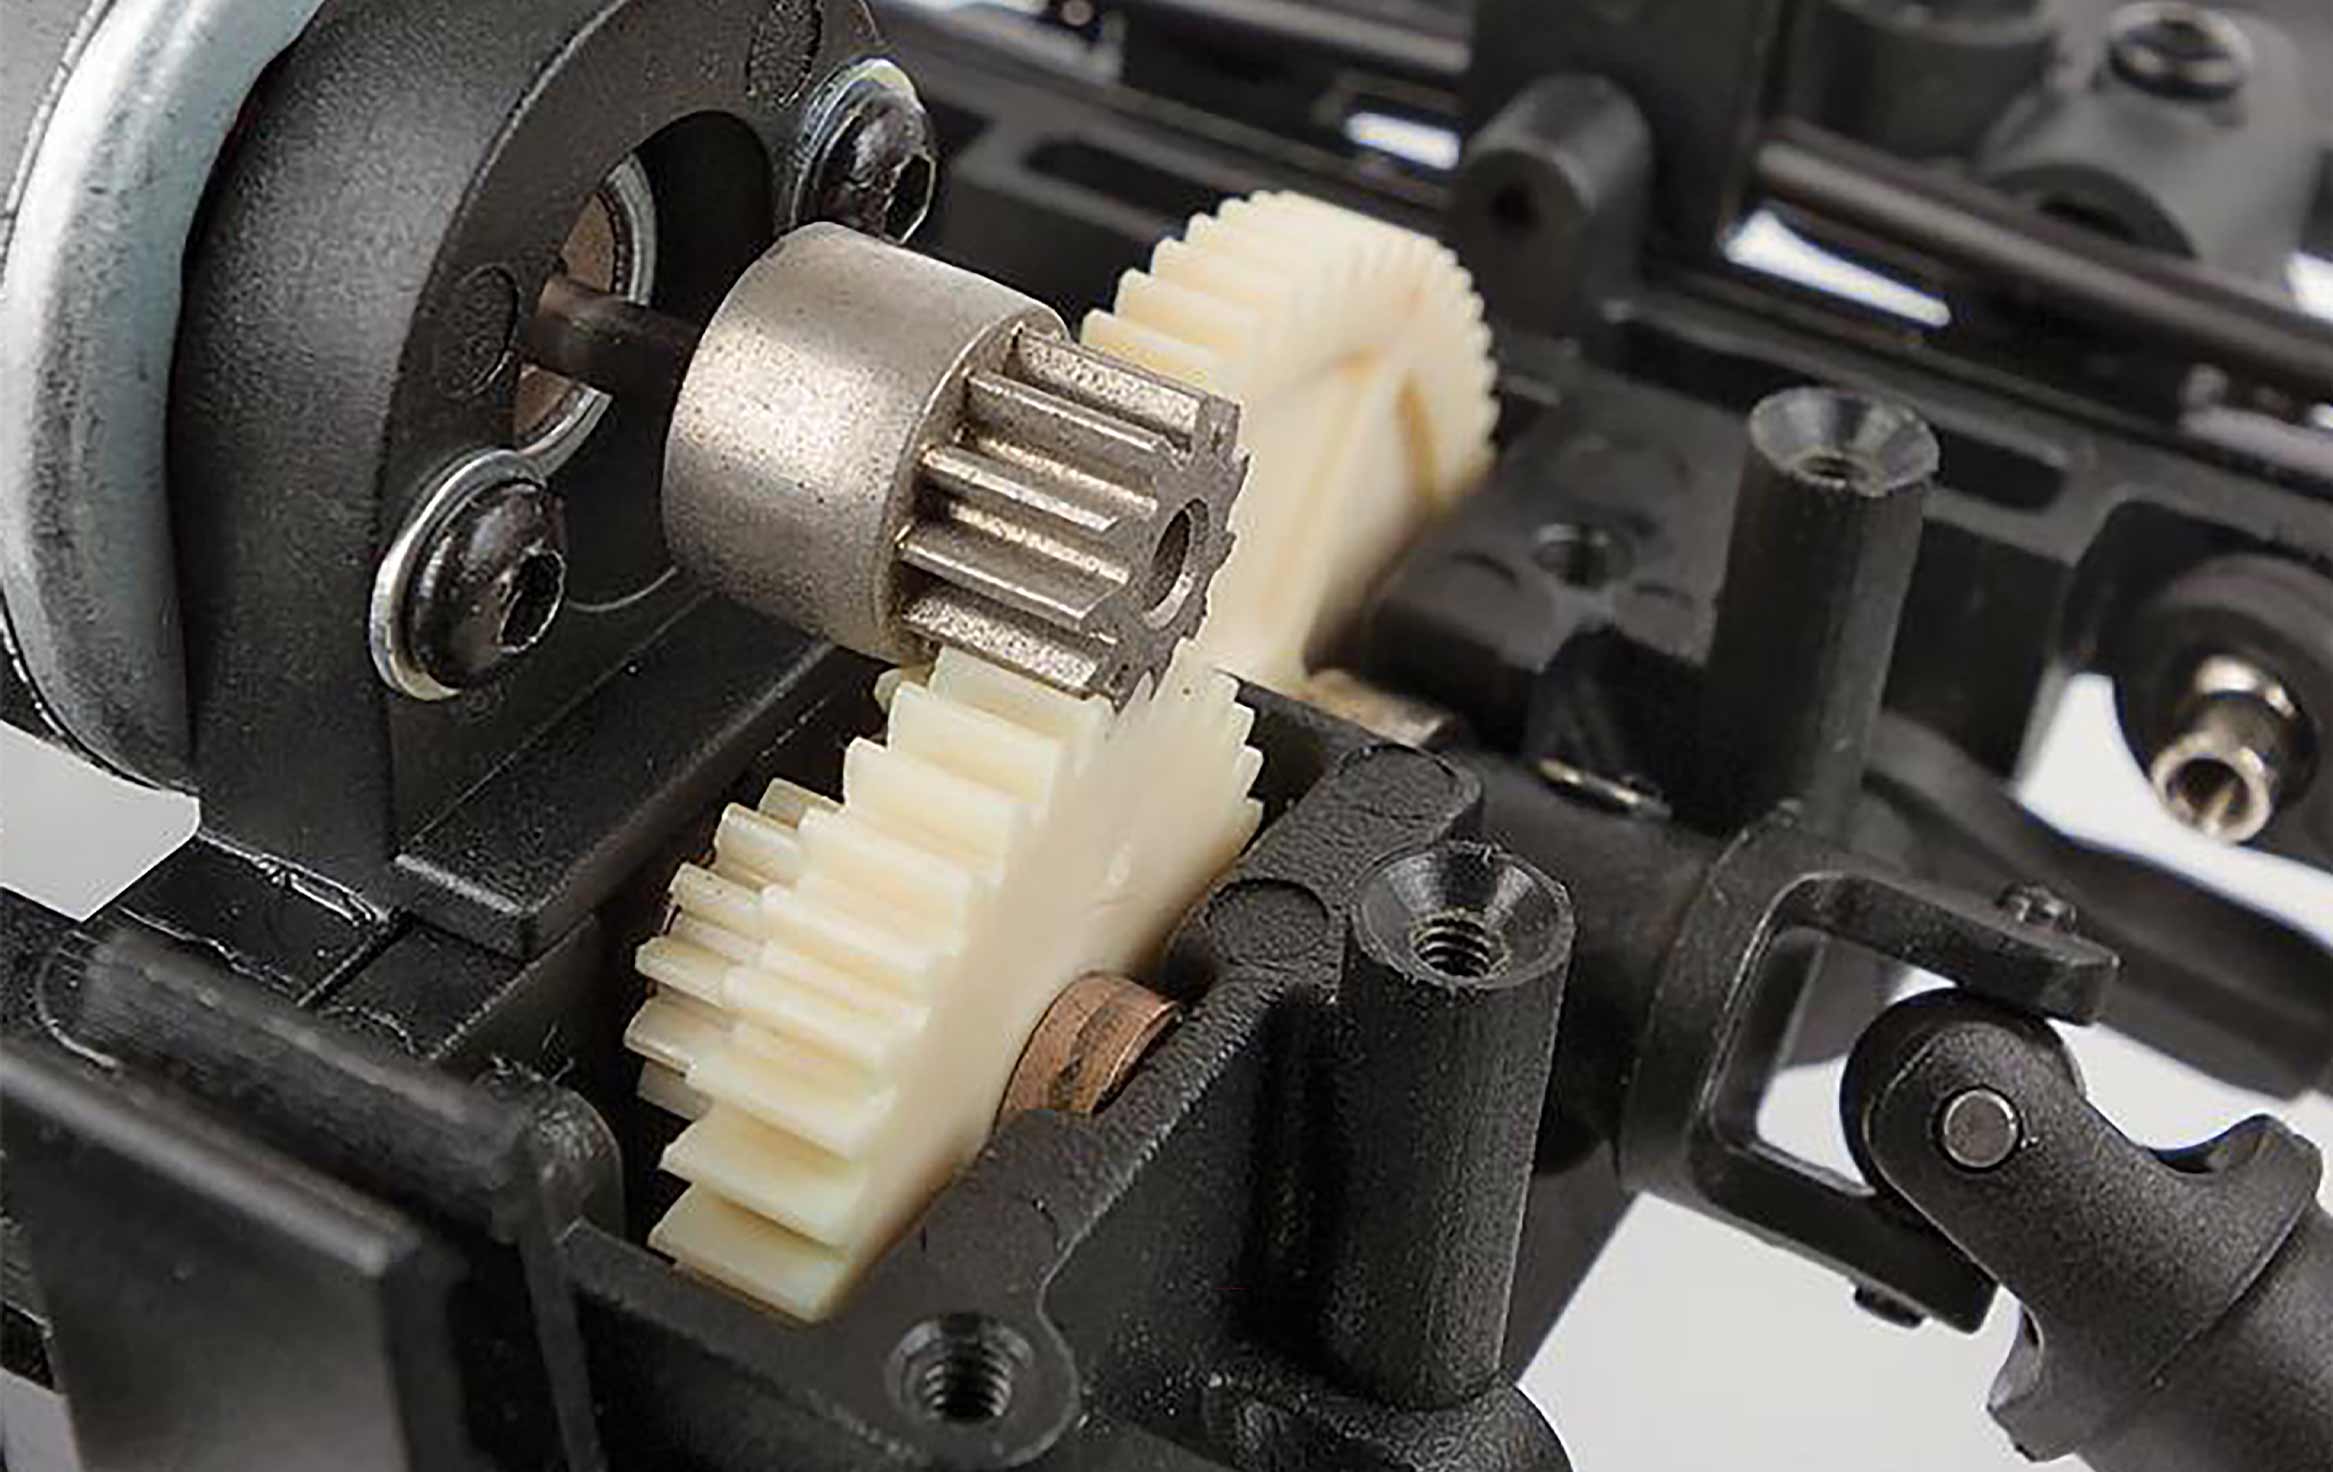 13.98:1 Ratio 3-Gear Transmission With Integrated Motor Mount